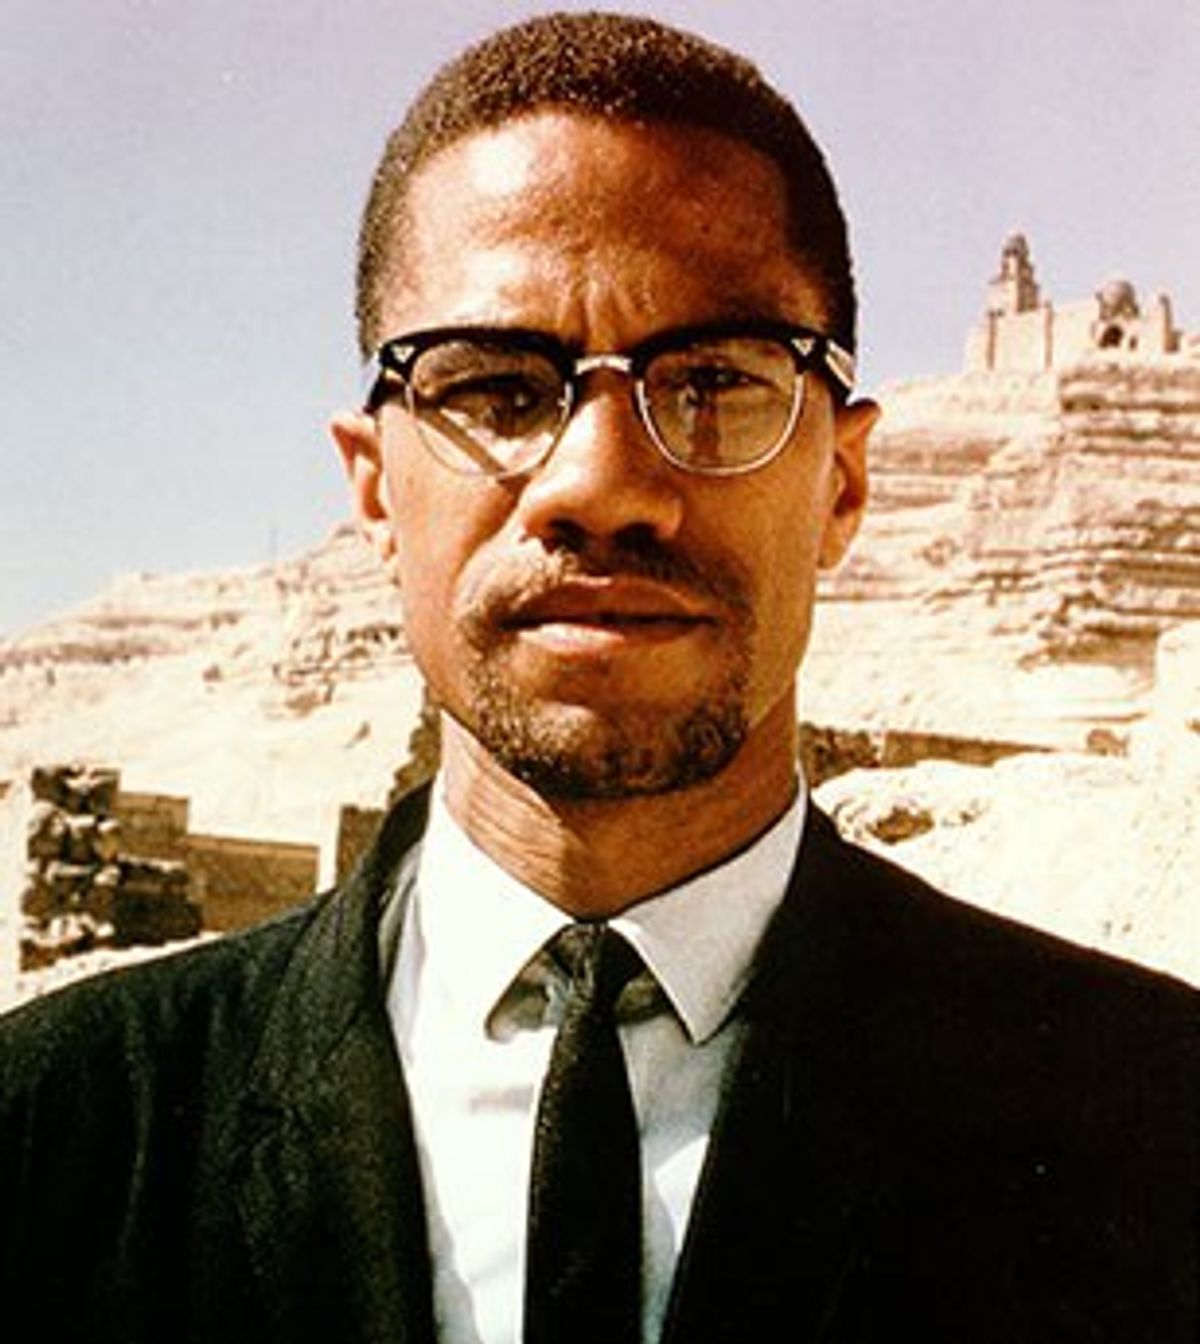 Does Malcolm X's Legacy Live On 61 Years Later?